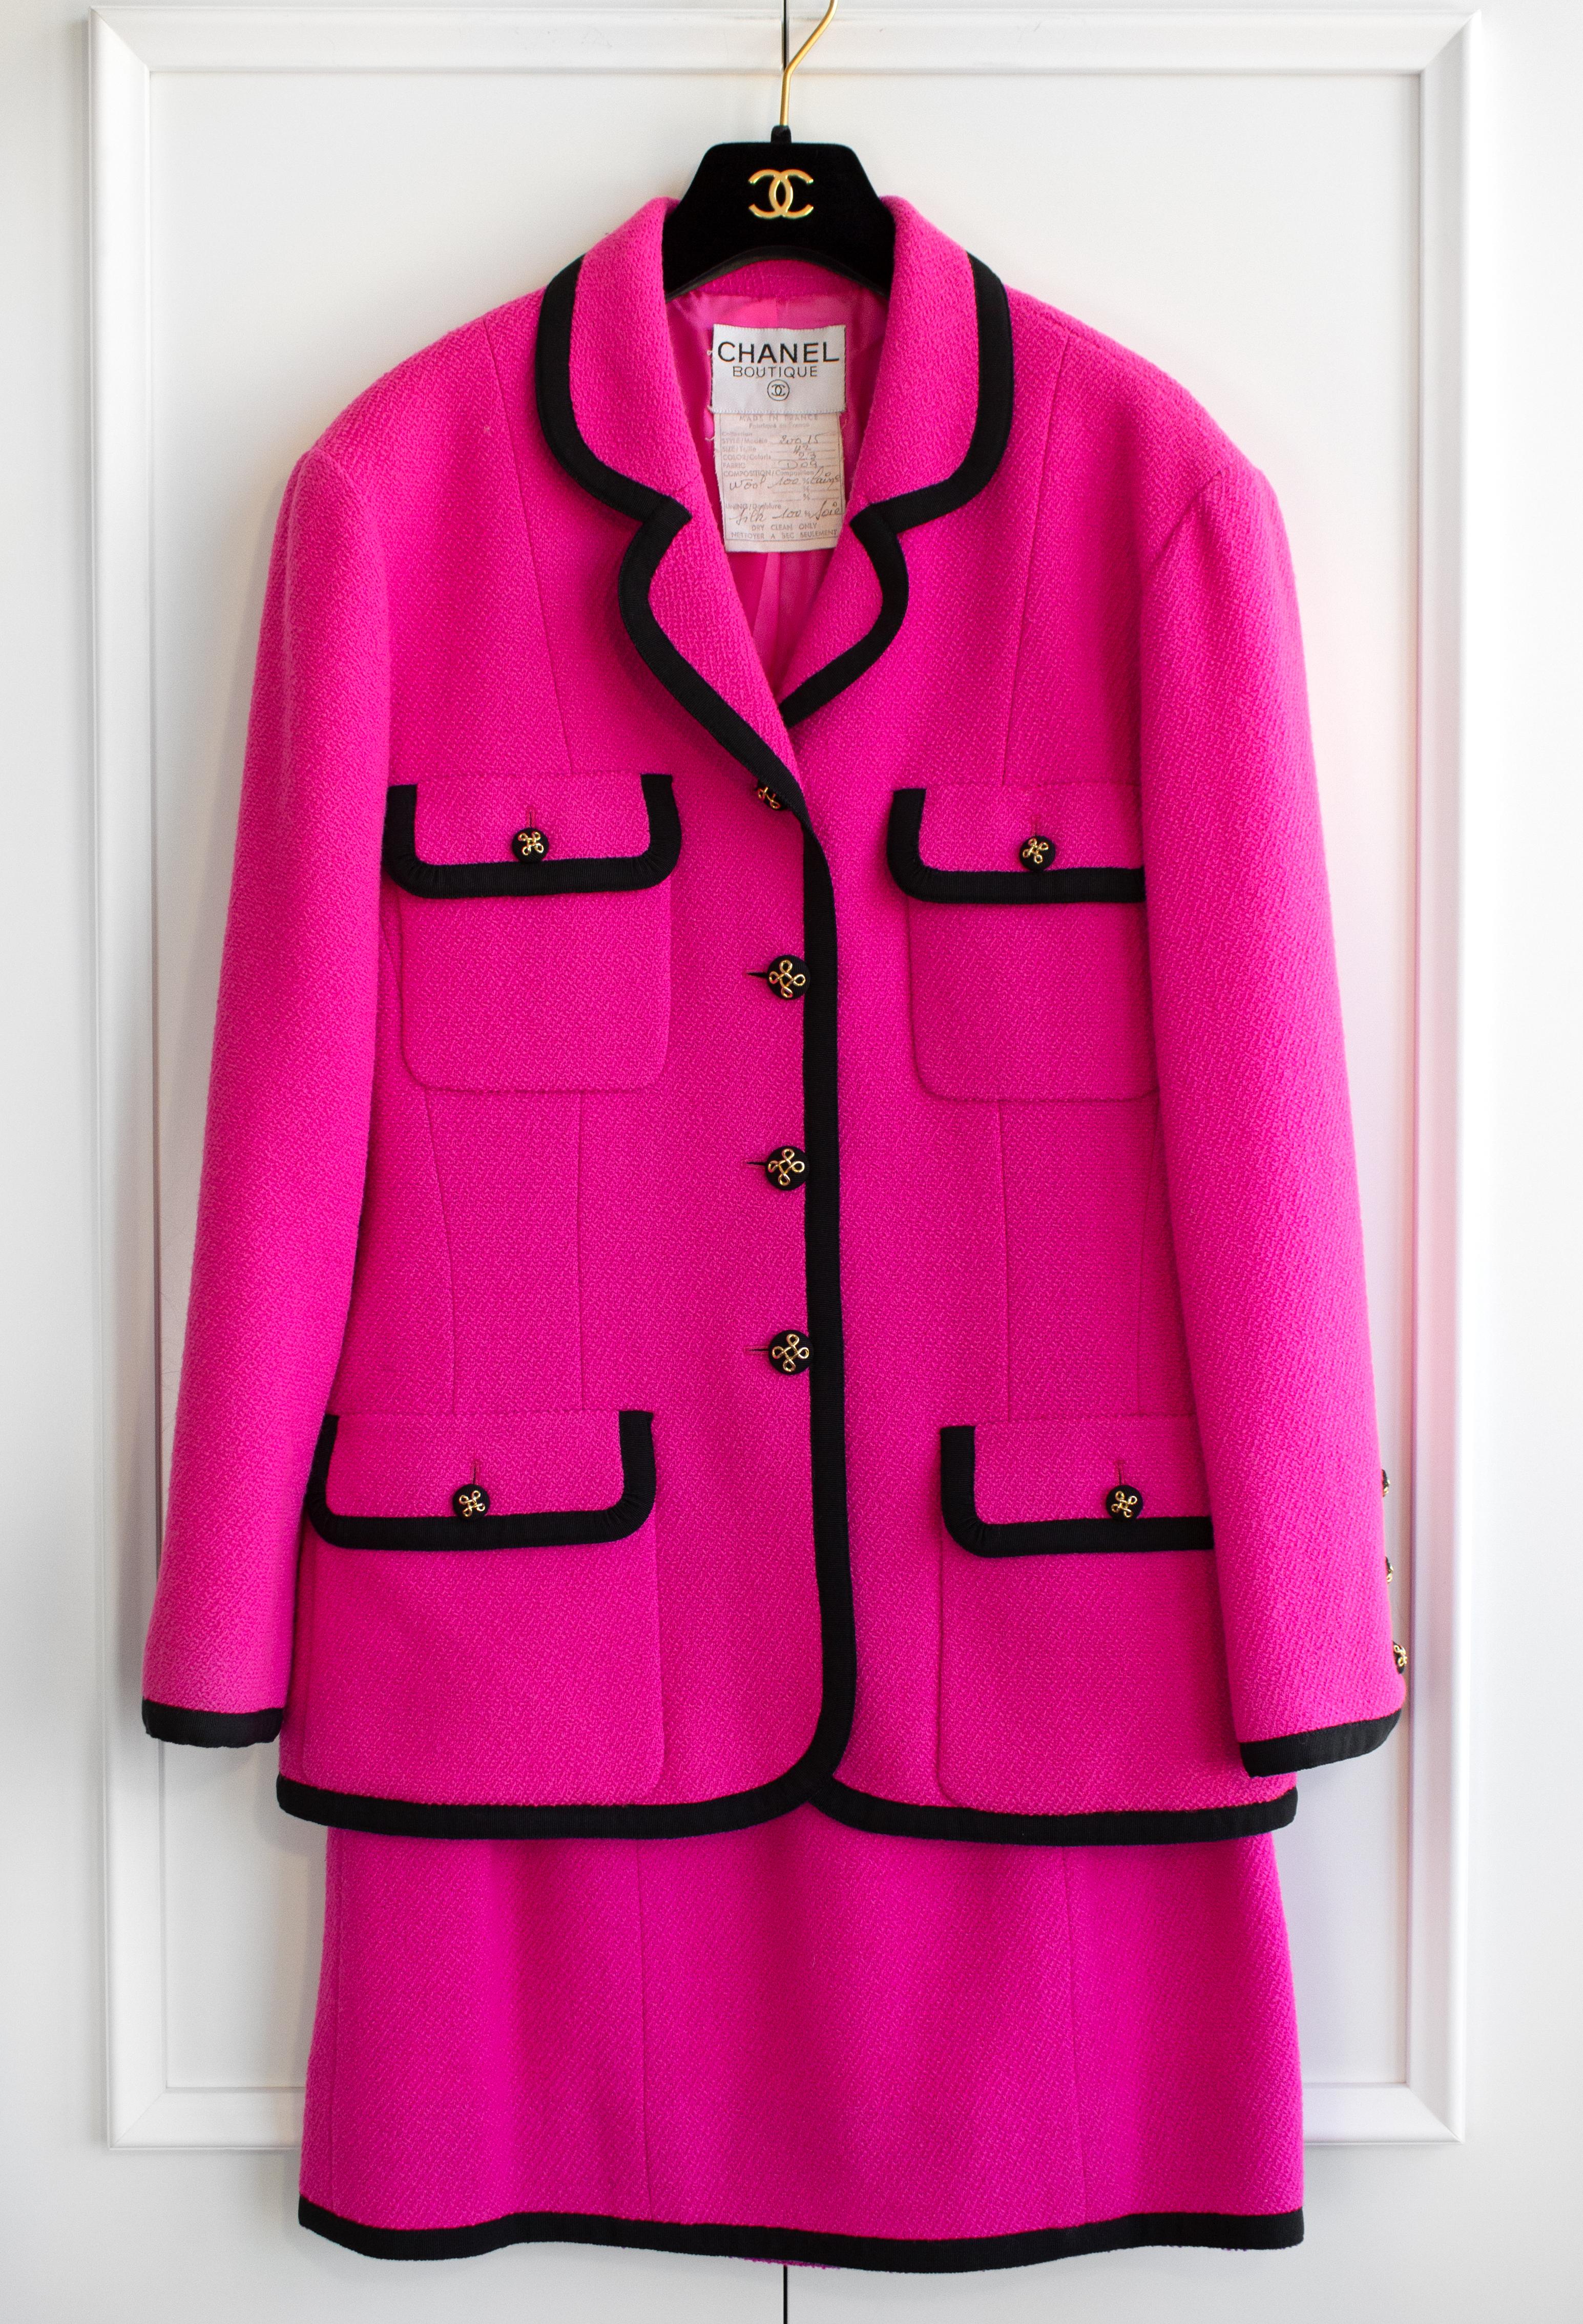 Chanel Vintage S/S 1991 Collector Fuchsia Pink Black Wool Jacket Skirt Suit In Good Condition For Sale In Jersey City, NJ